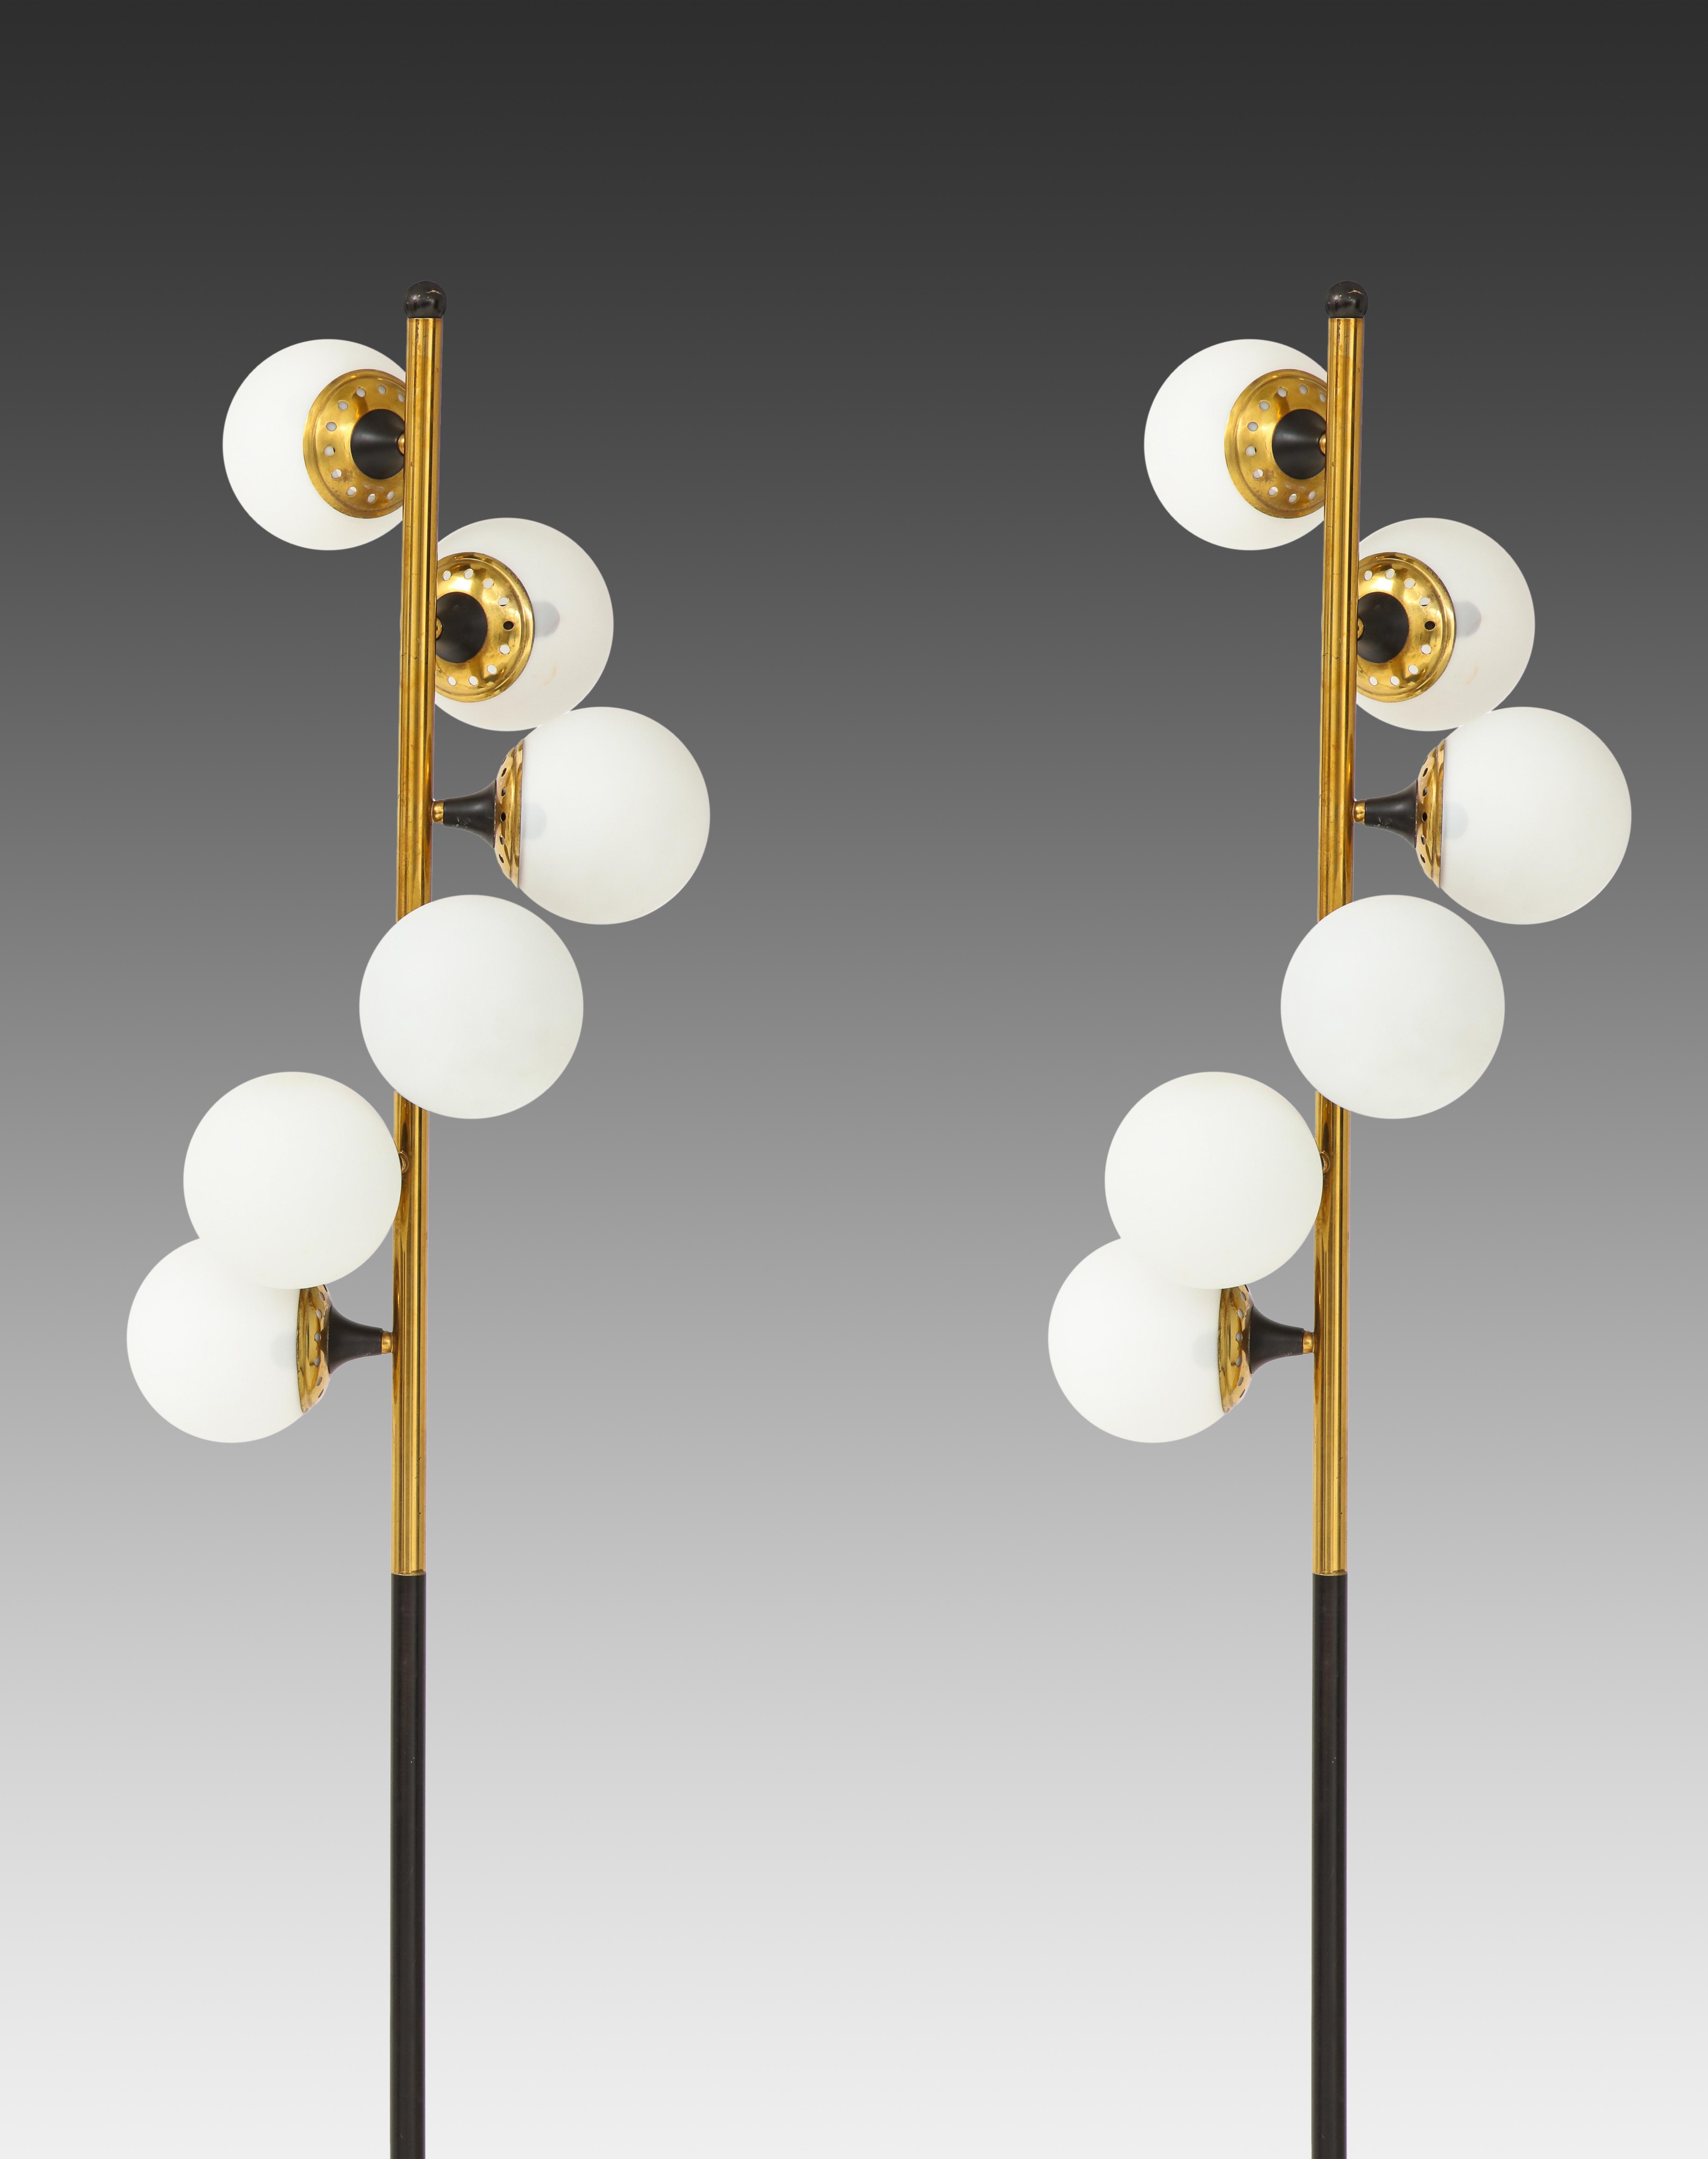 Stilnovo striking pair of floor lamps each composed of six frosted opaline glass balls cascading down gilt lacquered brass and black enameled metal stem on white marble base with original foot switch. Beautiful and iconic 1950s Stilnovo design with